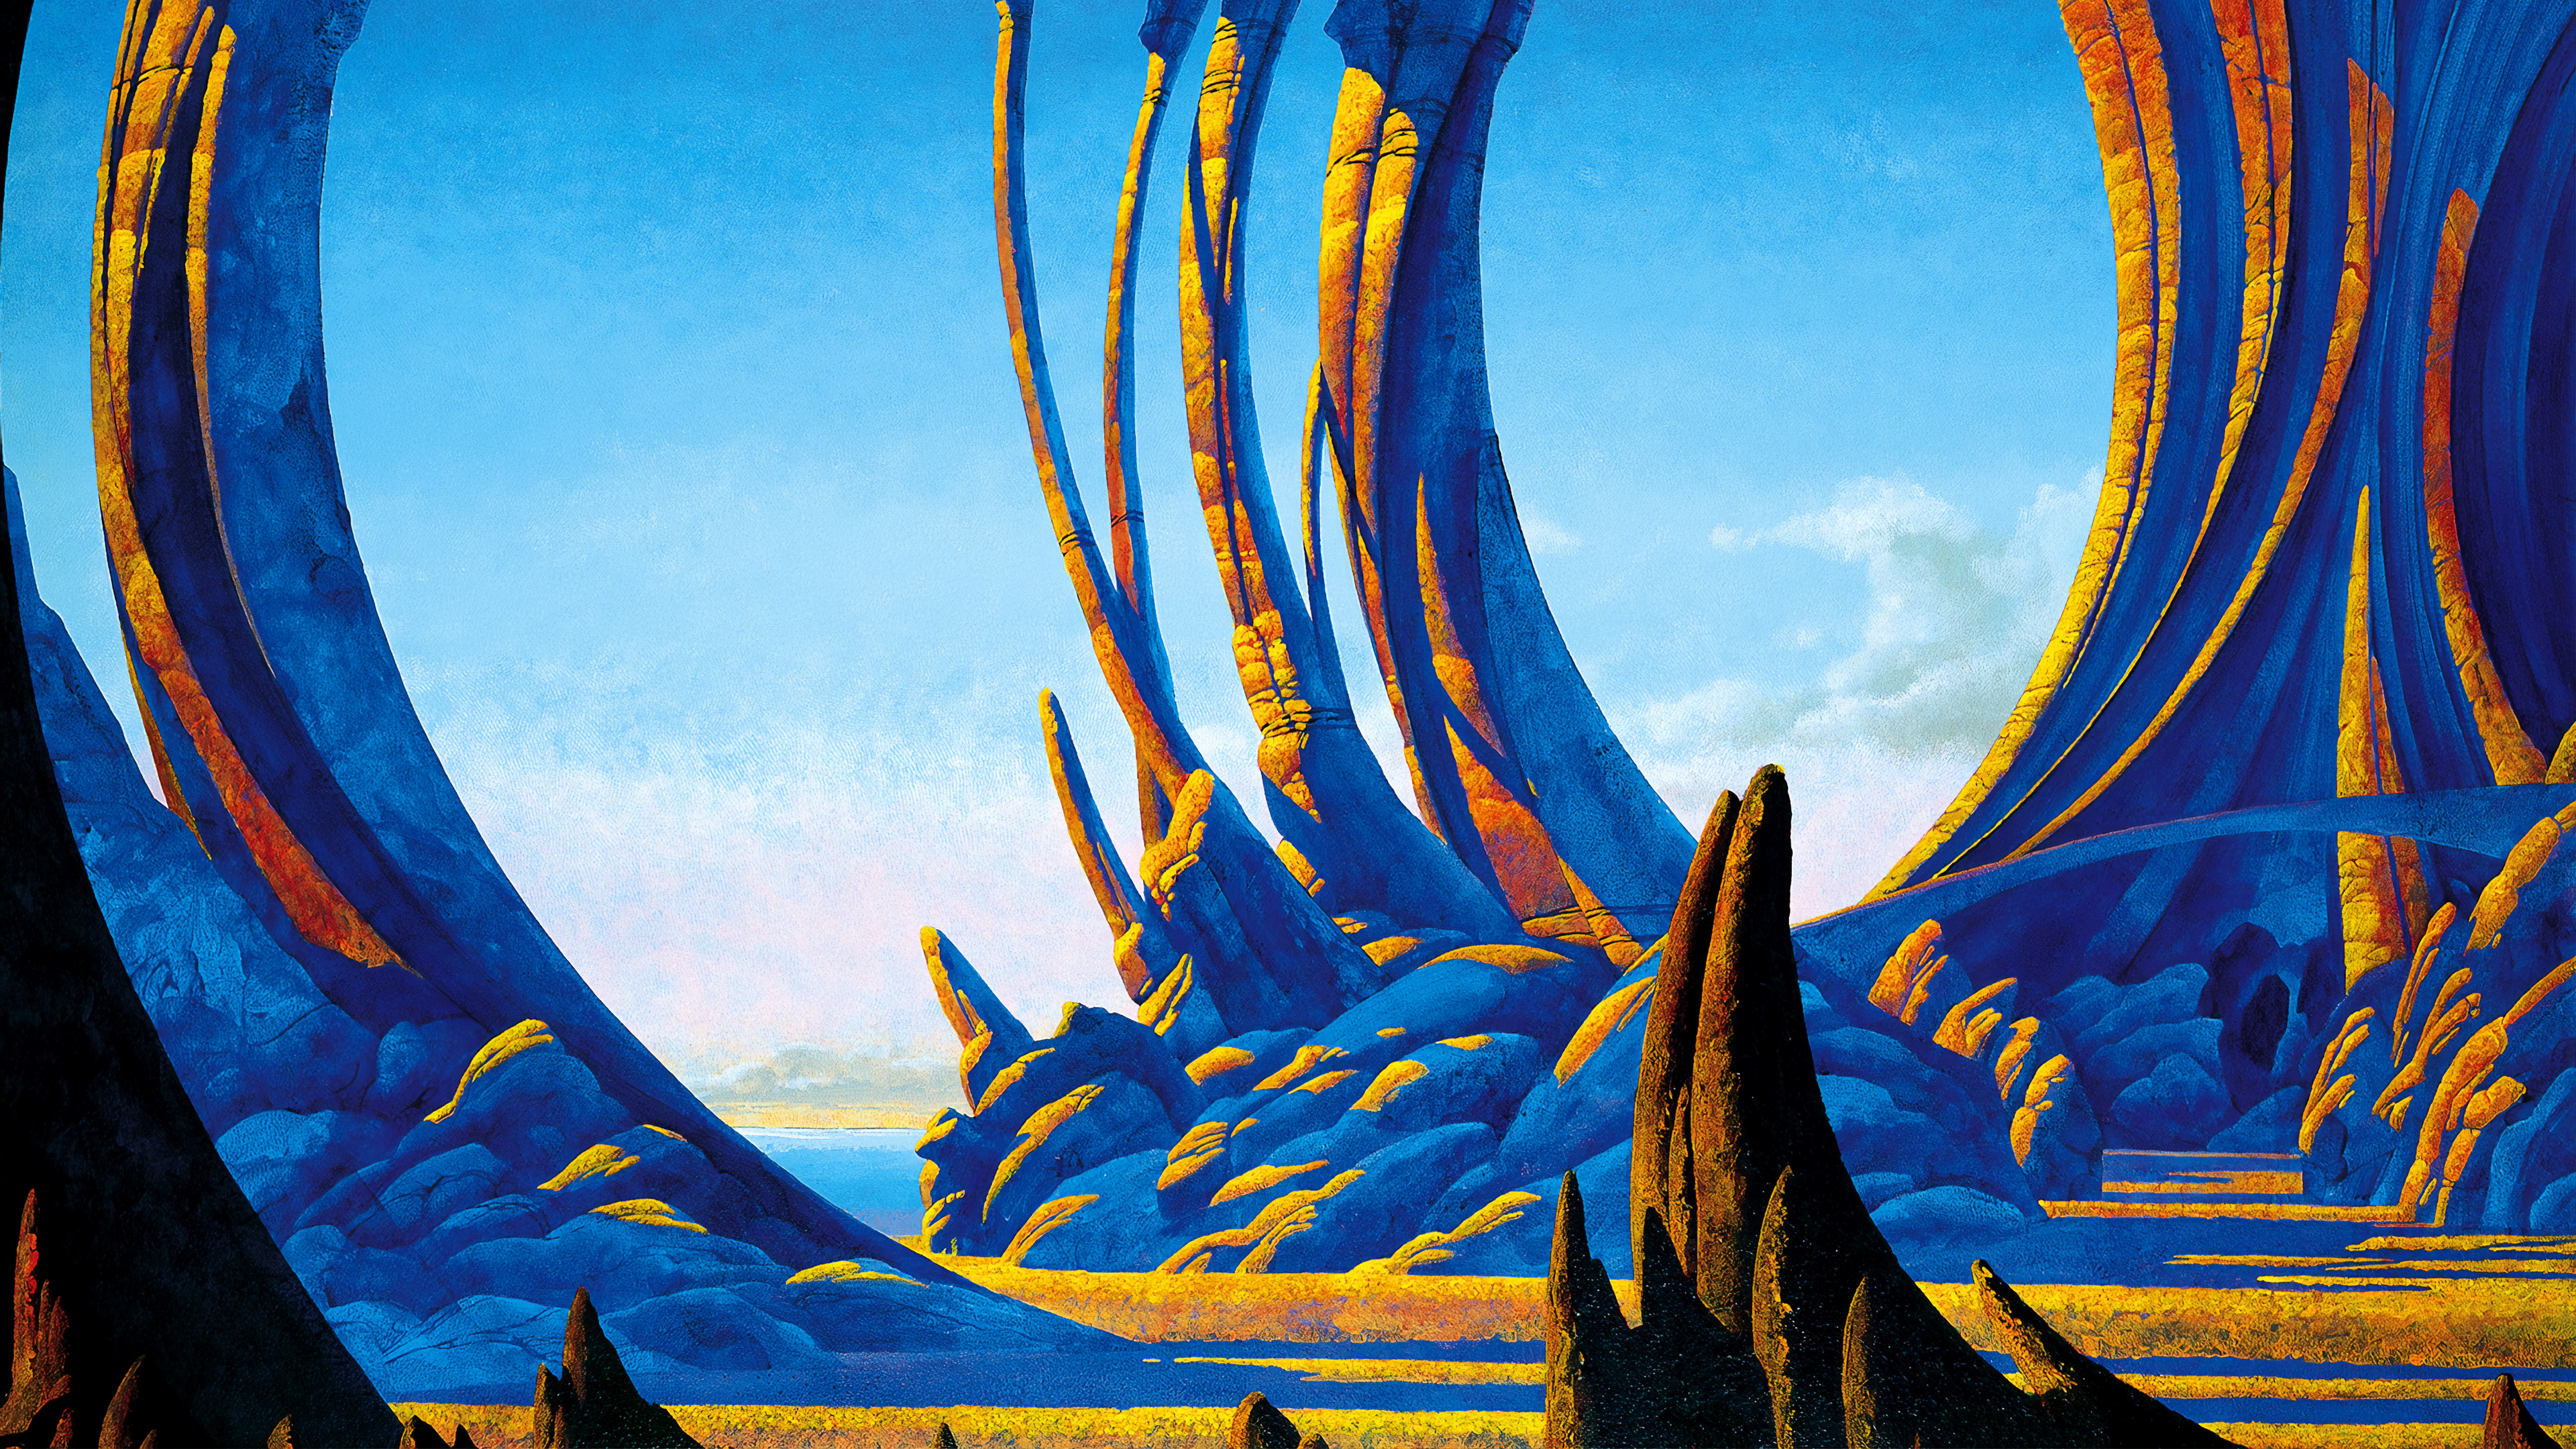 Union by Roger Dean [3840x2160]